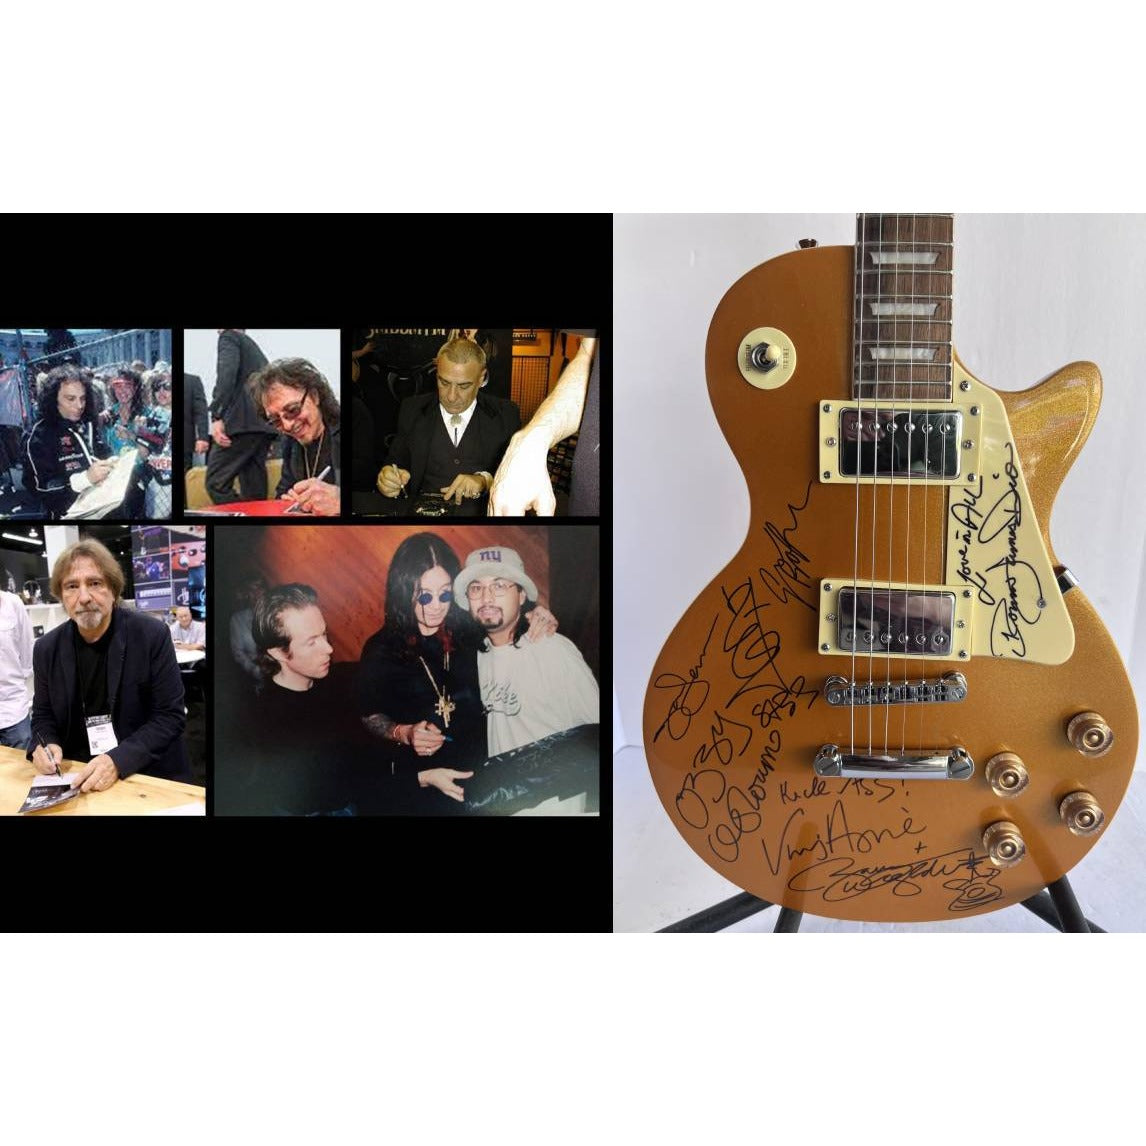 Ozzy Osbourne Ronnie James Dio Tony iomi Bill Ward Geezer Butler Vinnie a piece full size Les Paul electric guitar signed with proof